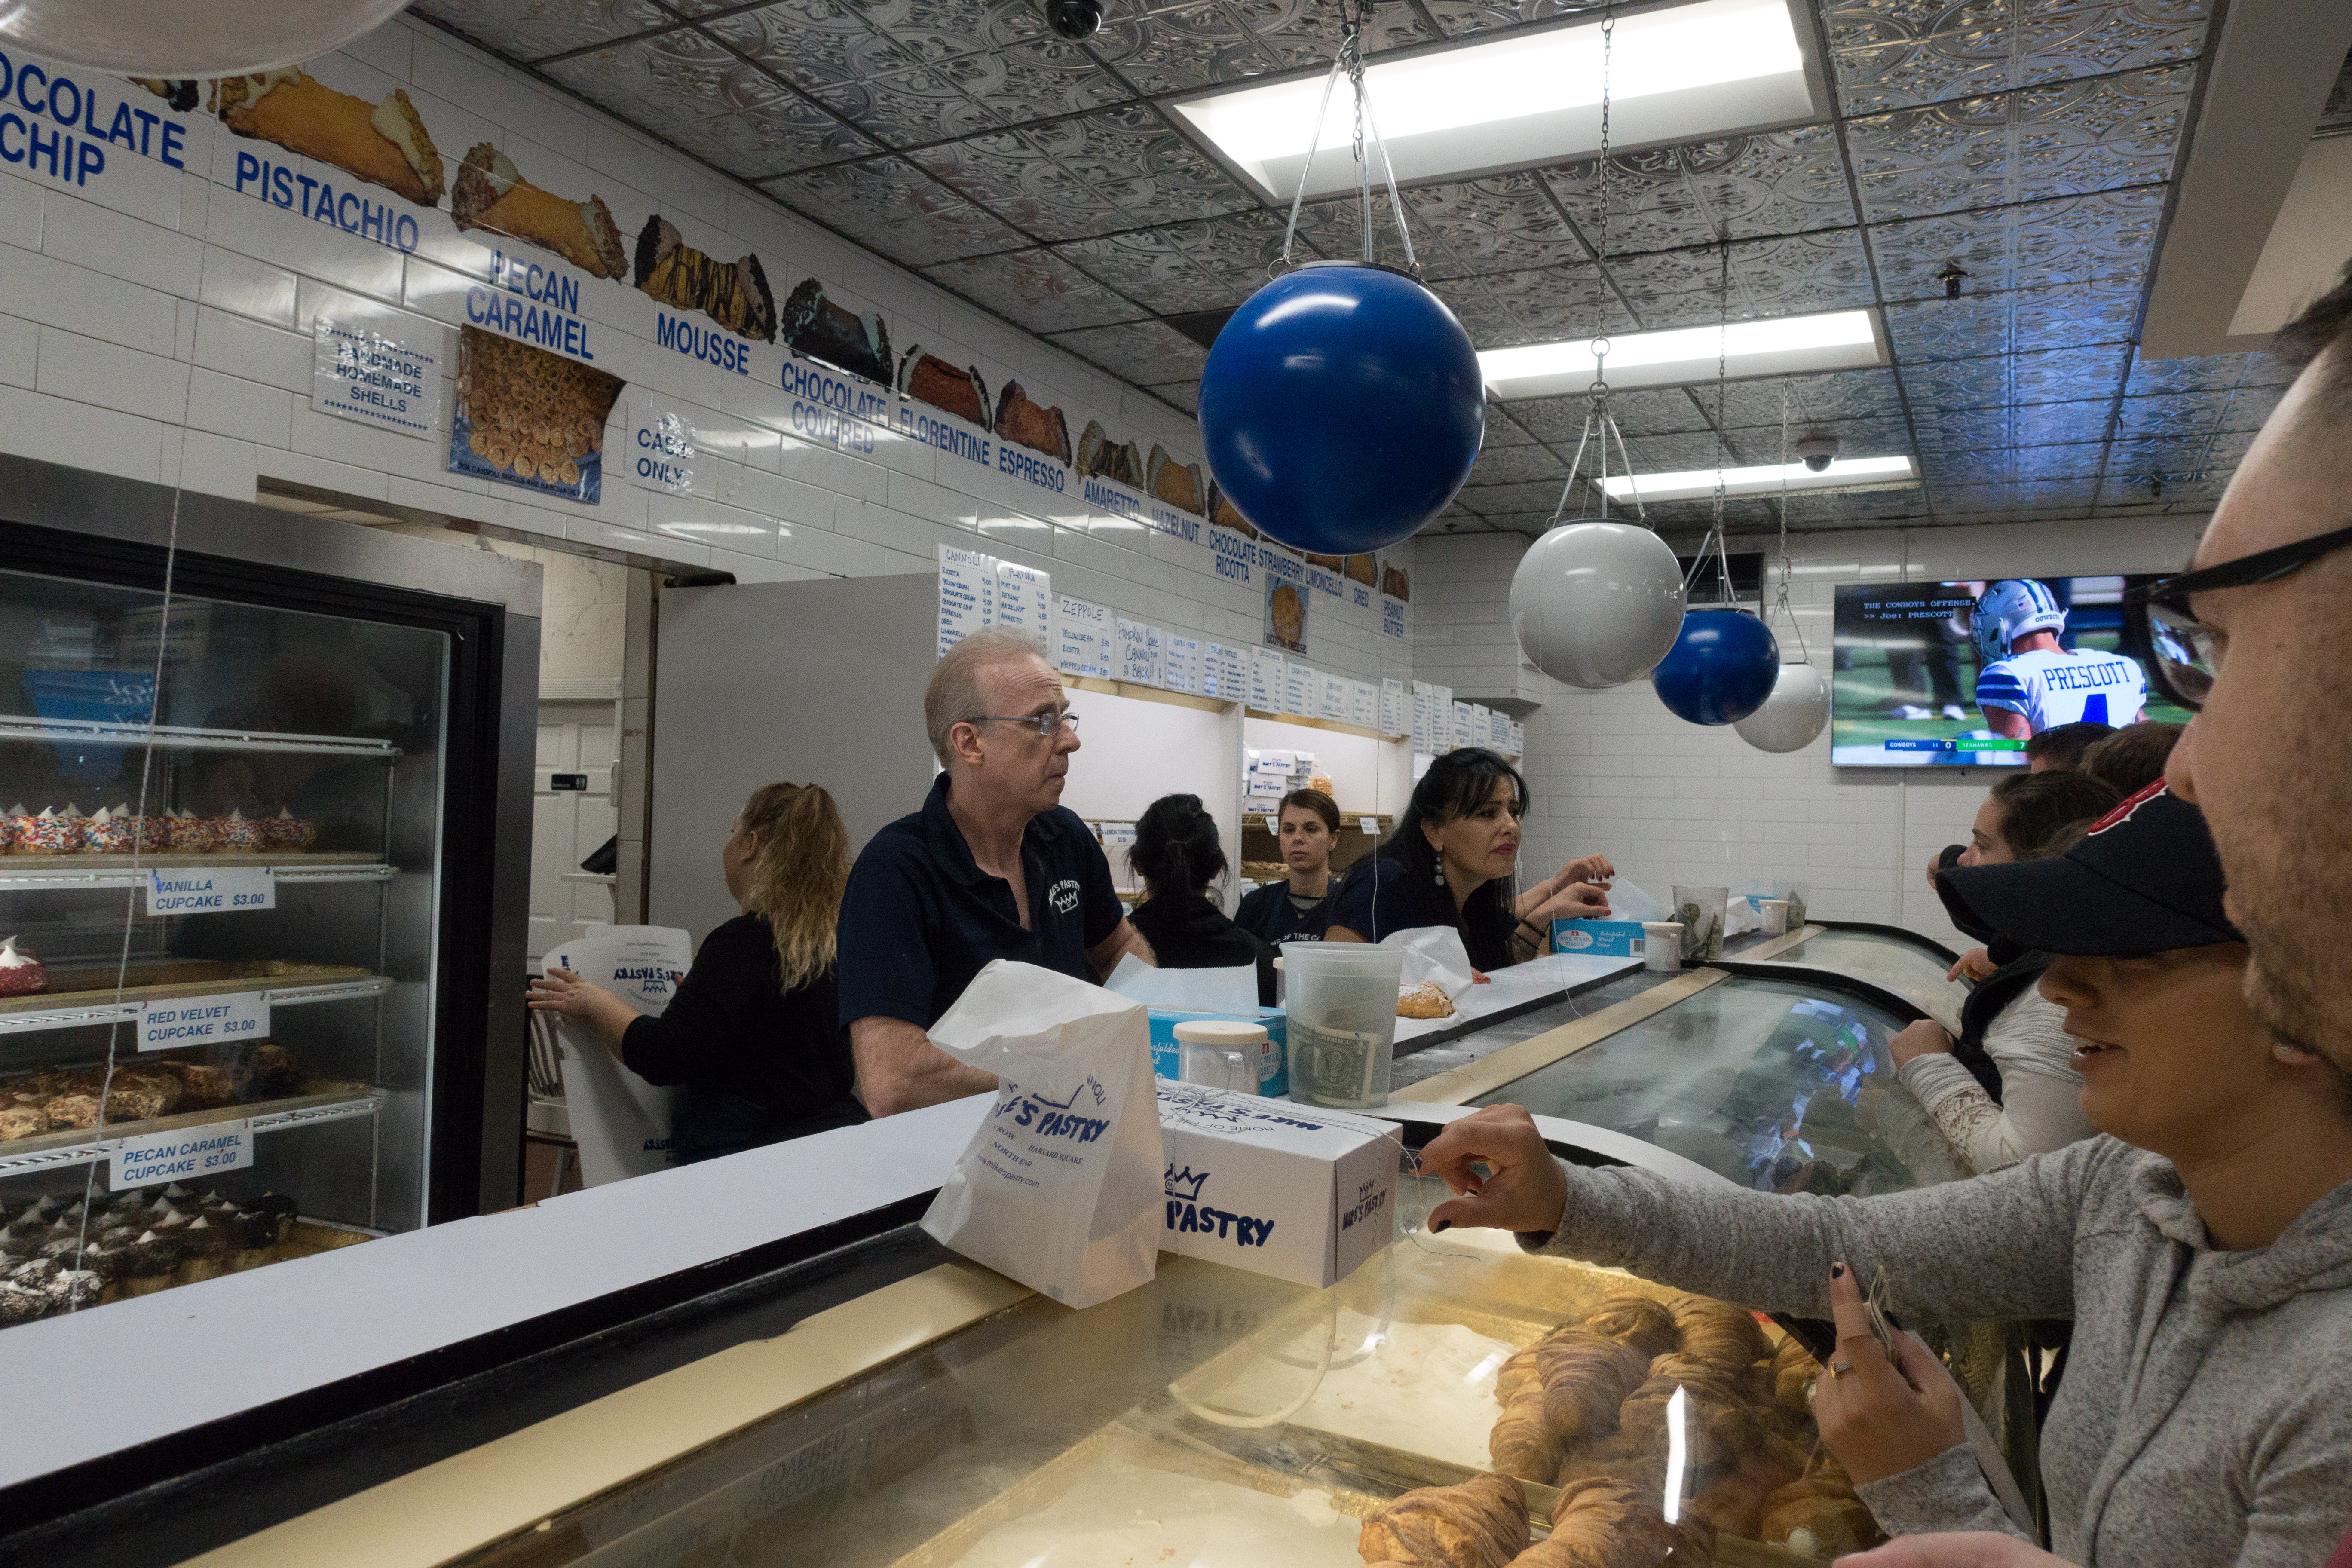 A look inside the crazy busy pastry shop near Paul Revere's House along the Freedom Trail.  Mike's pastries is a great place to grab canolis in Boston, Massacusetts 